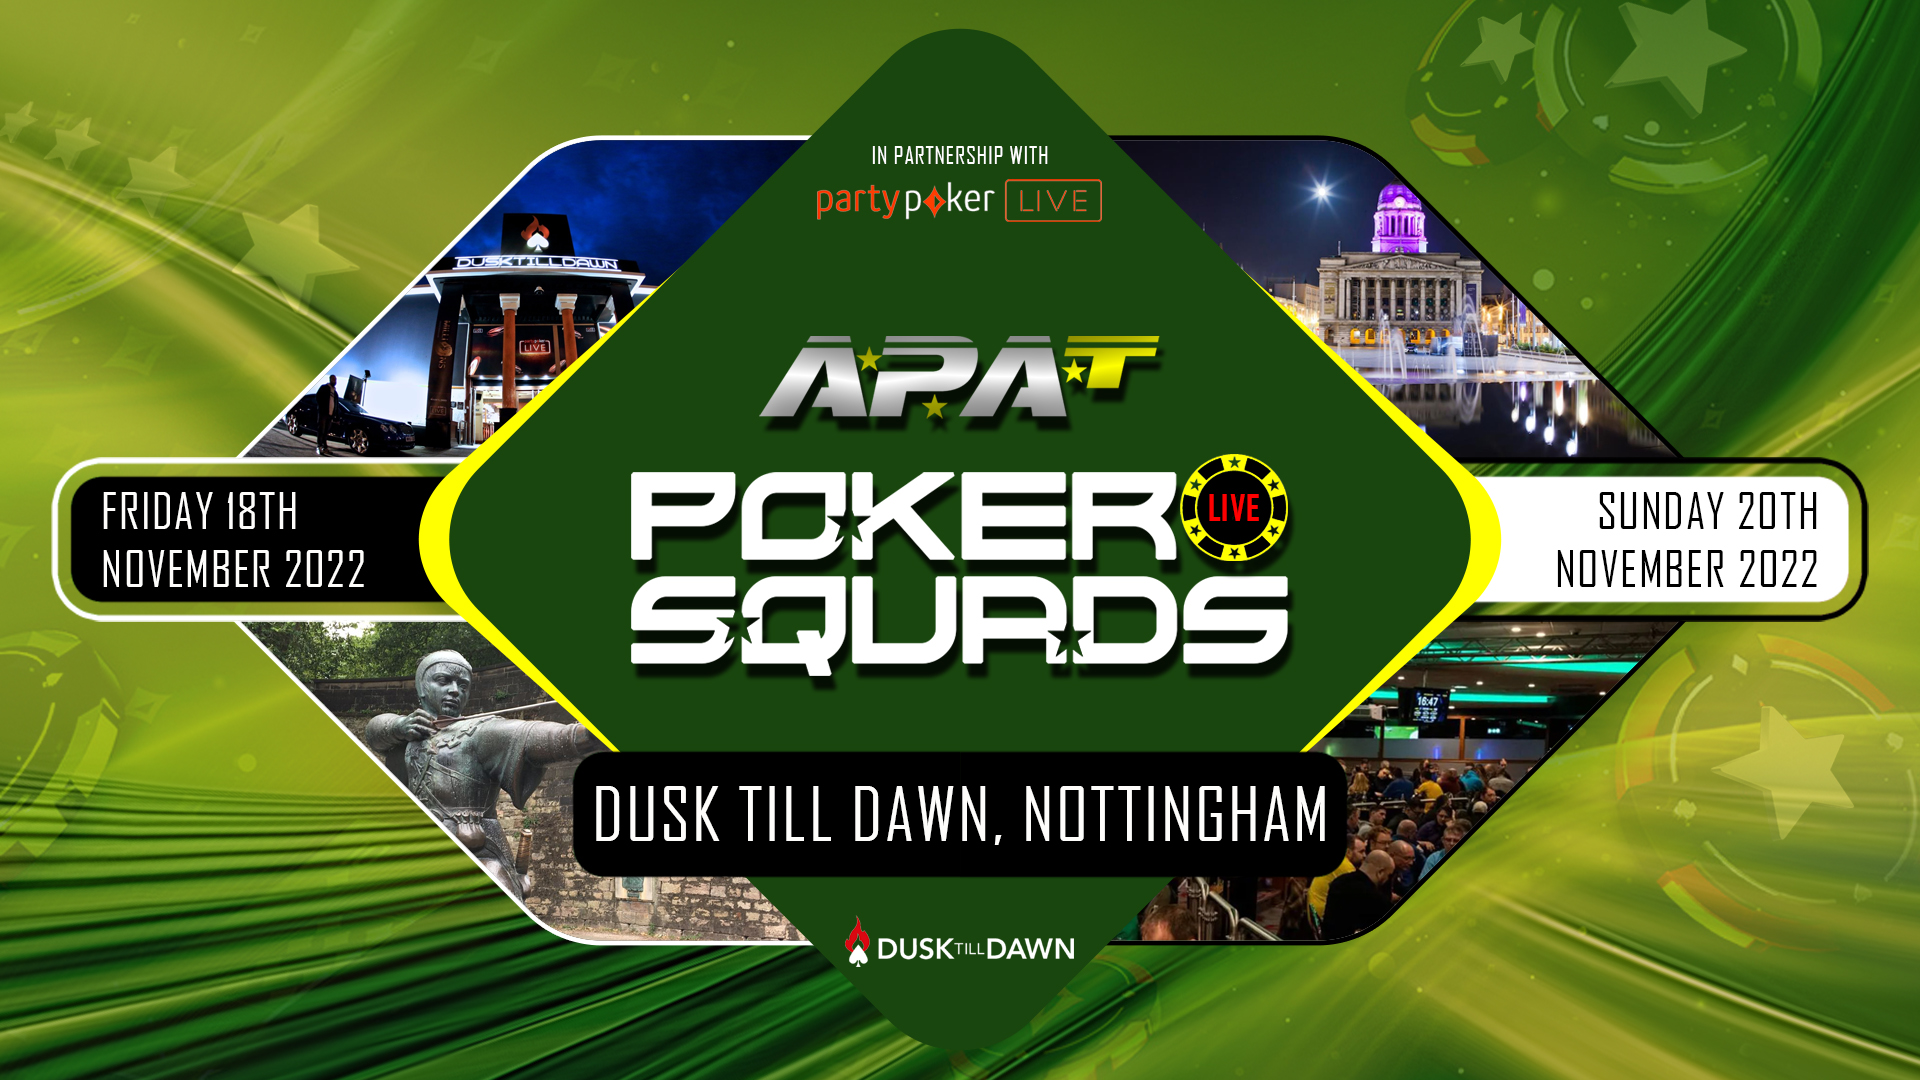 APAT Poker Squads Live @ DTD – First 40 Teams